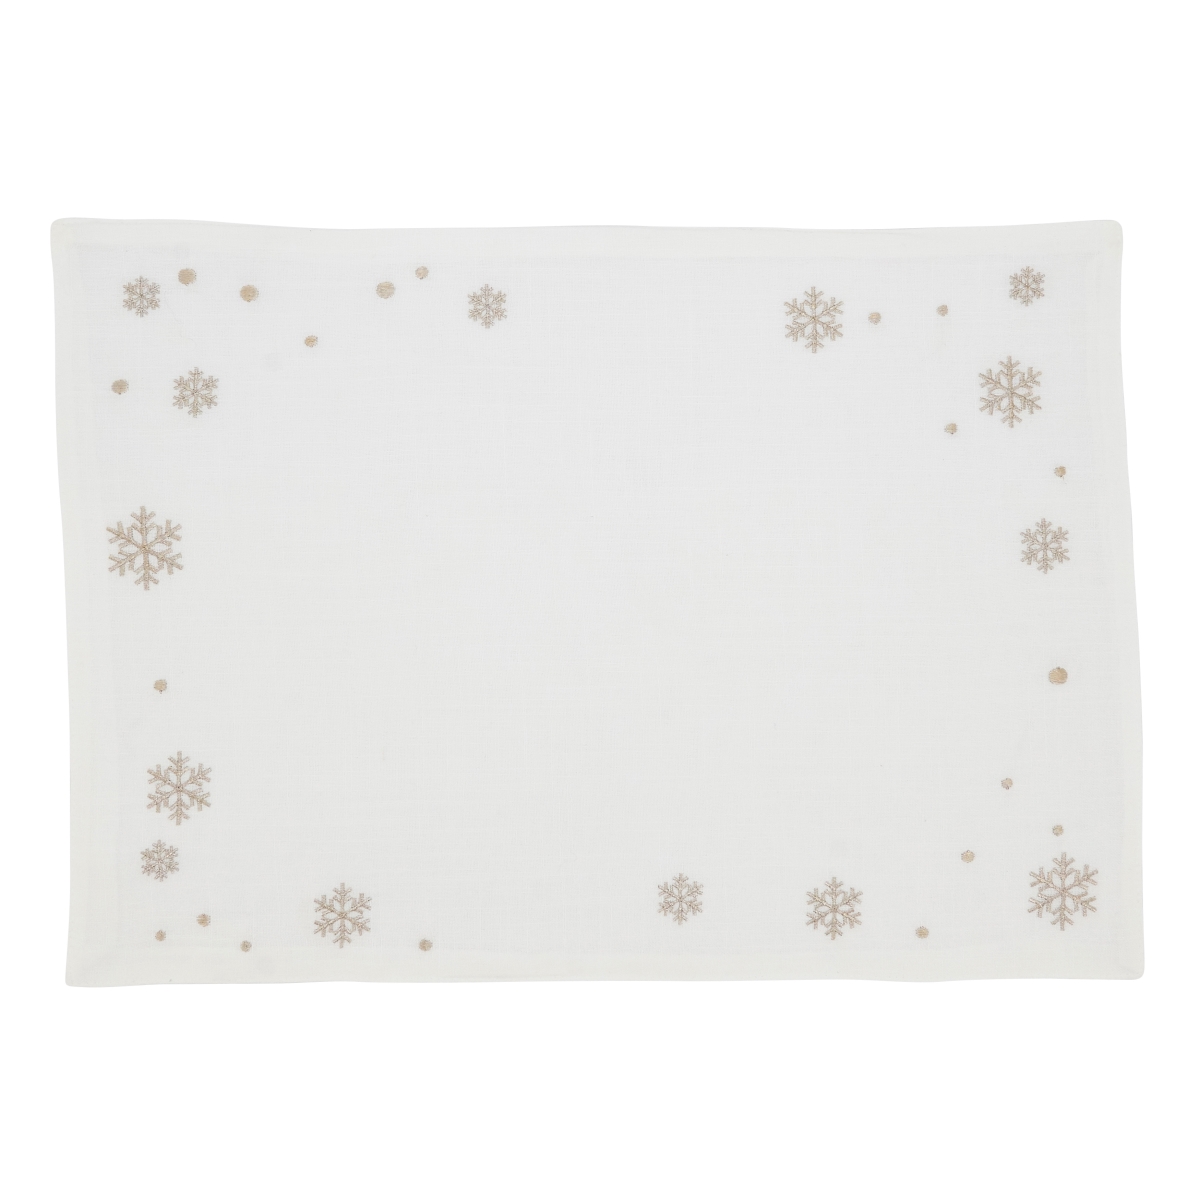 SARO LIFESTYLE 3495.GL1420B 14 x 20 in. Frosty Flakes Embroidered Snowflake Oblong Placemat&#44; Gold - Set of 4